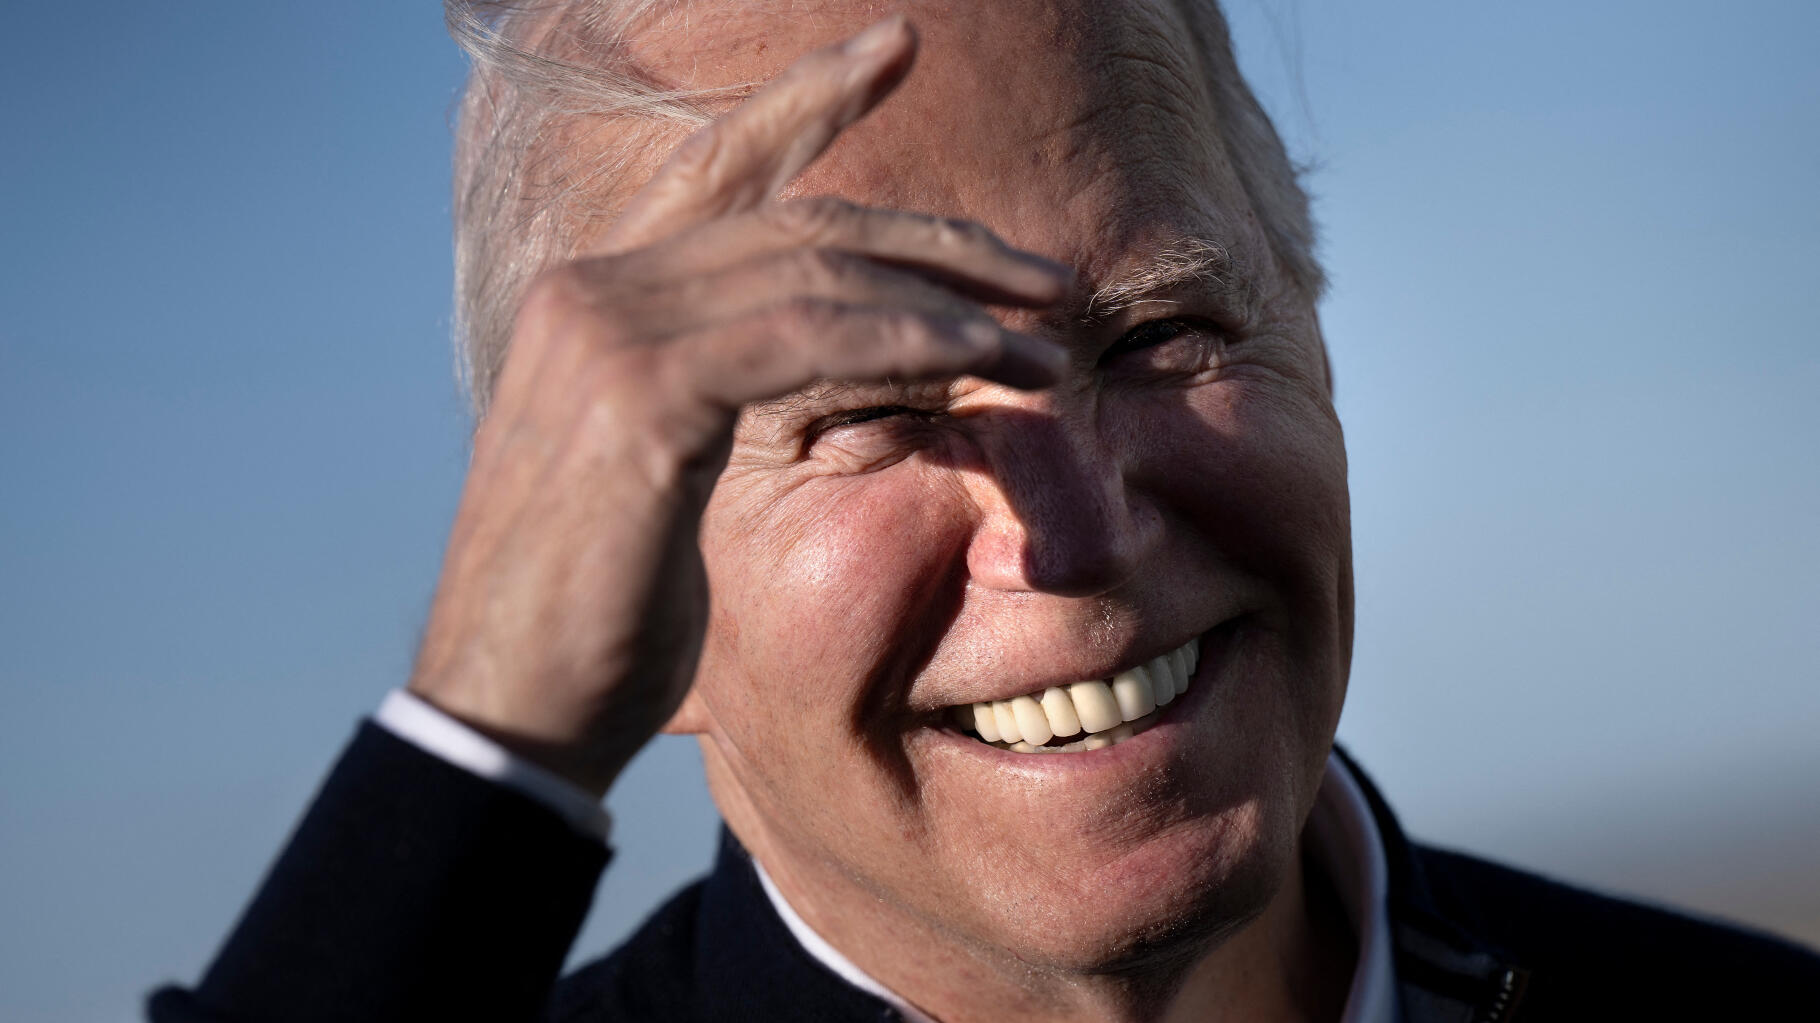 Biden continues to mock criticism of his age and turn it against Trump